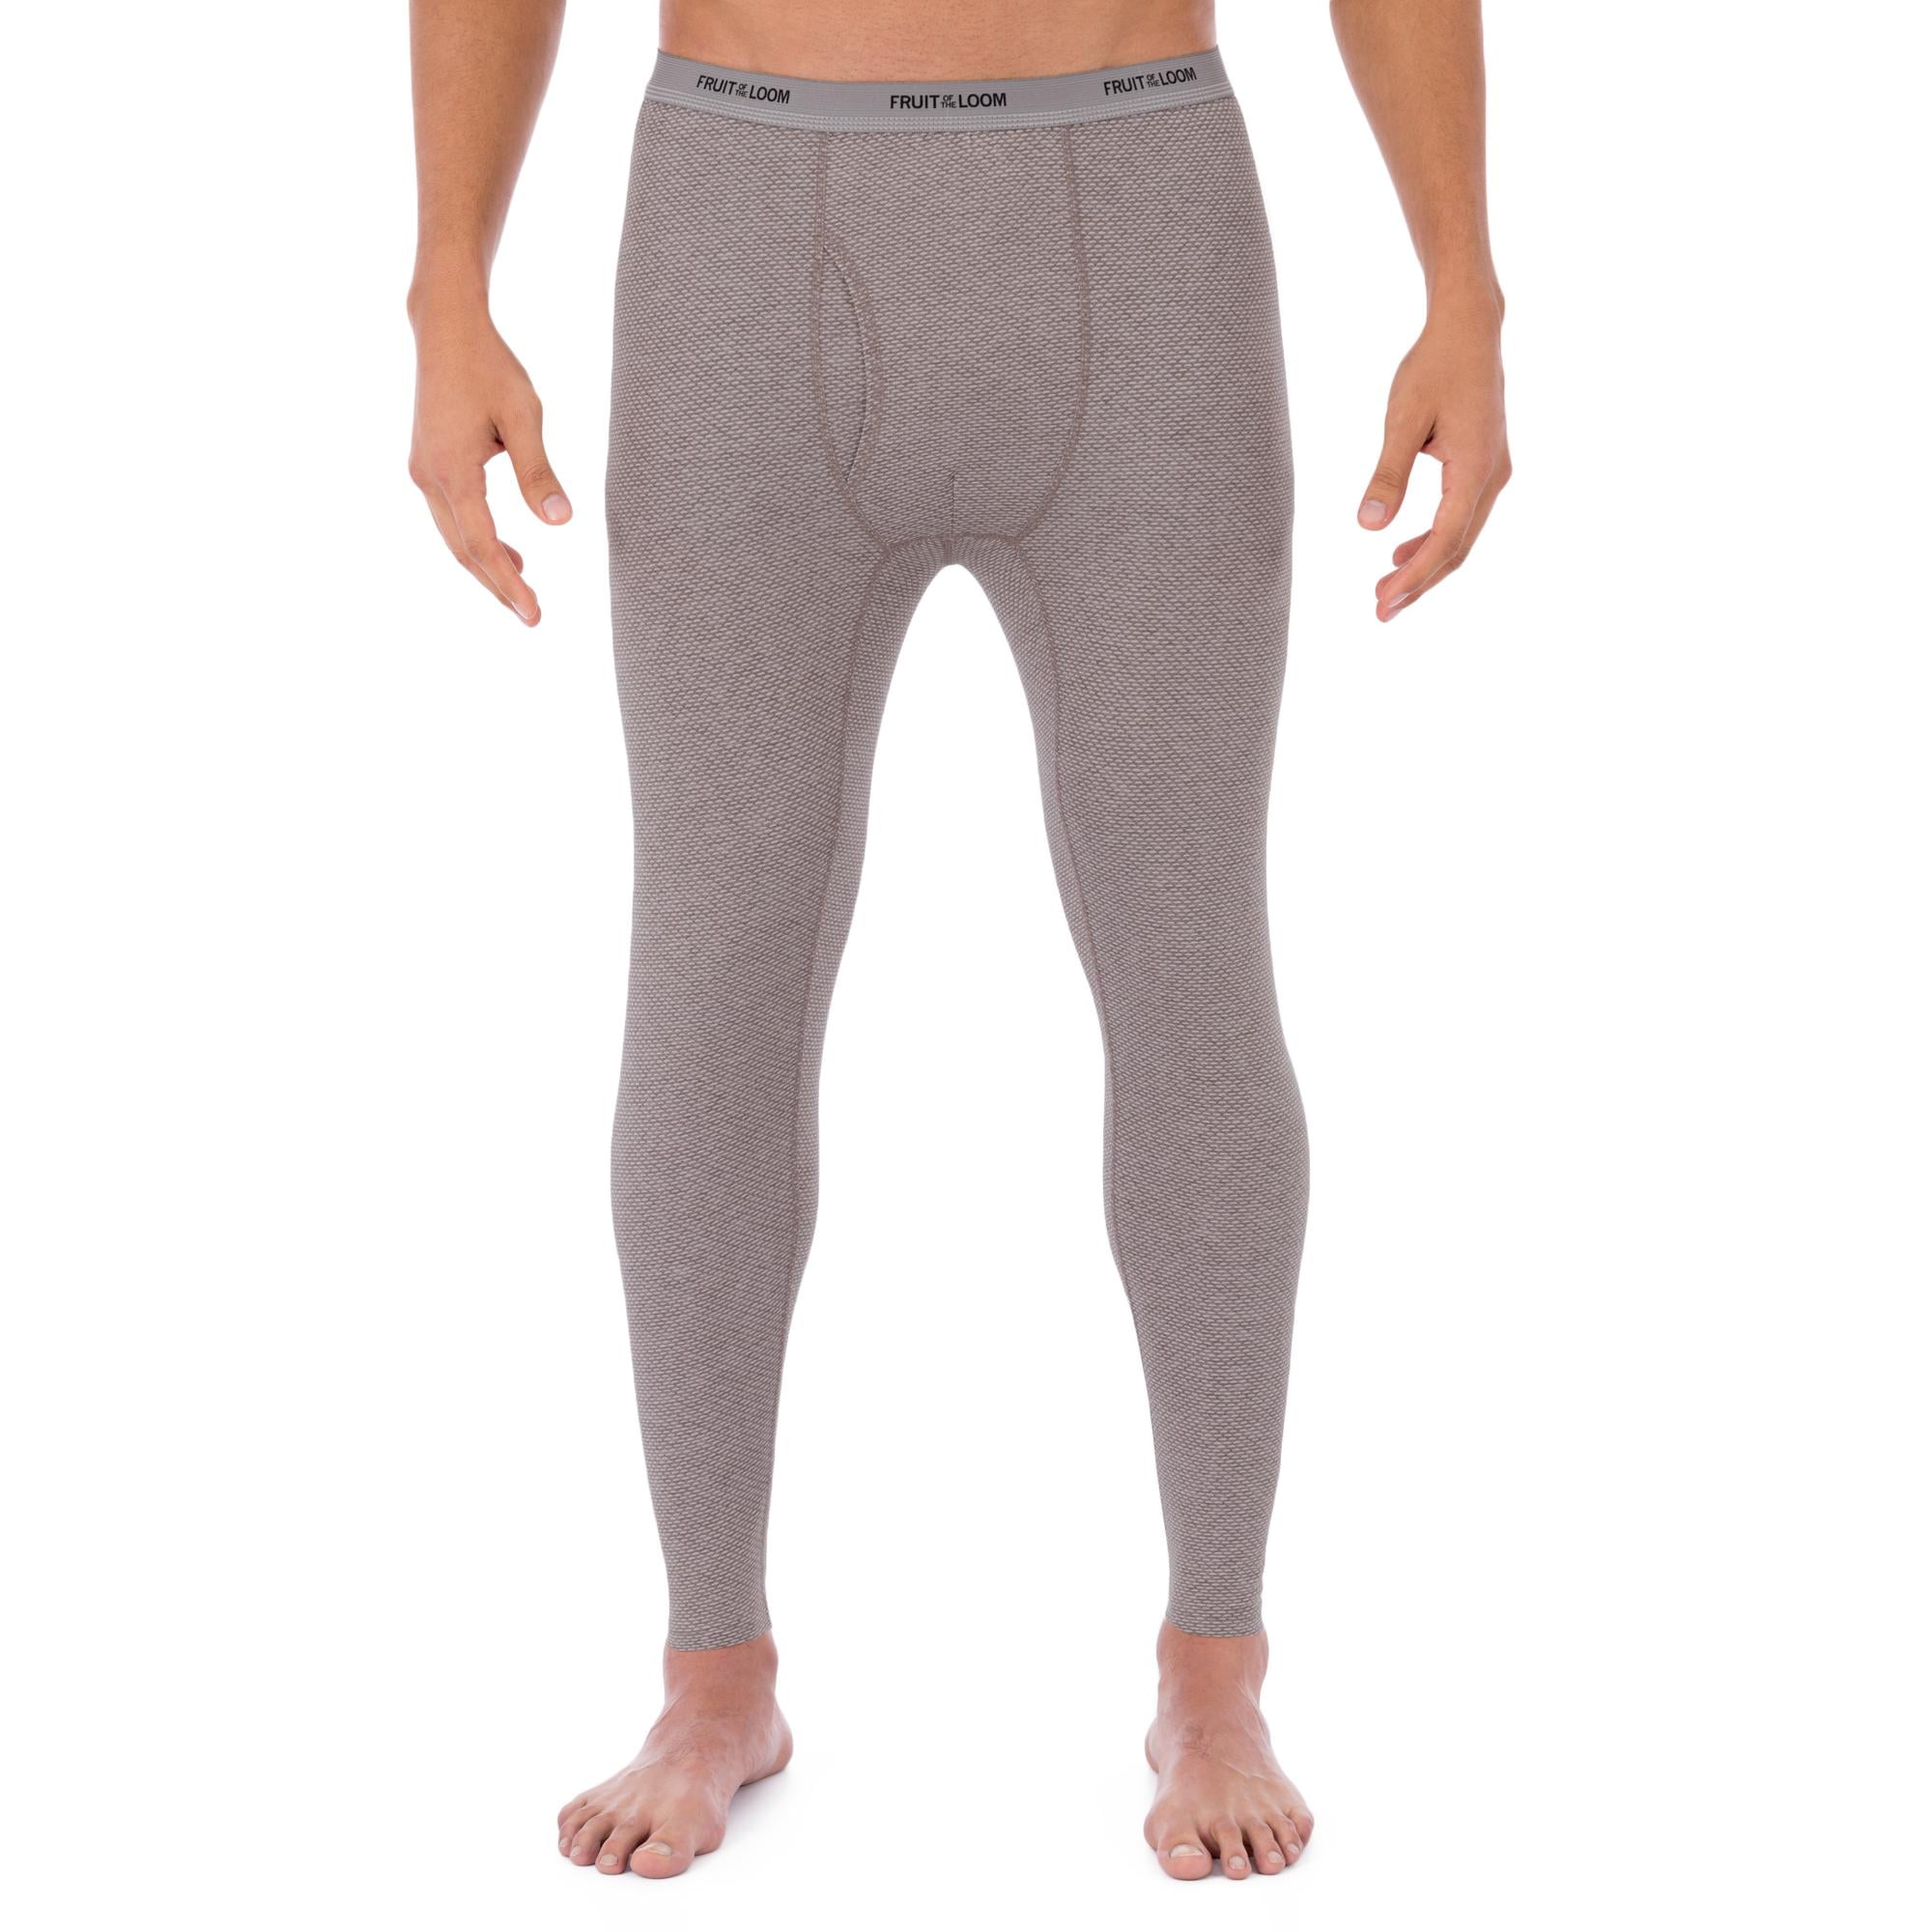 Fruit of the Loom Men's Breathable Super Cozy Thermal Pant